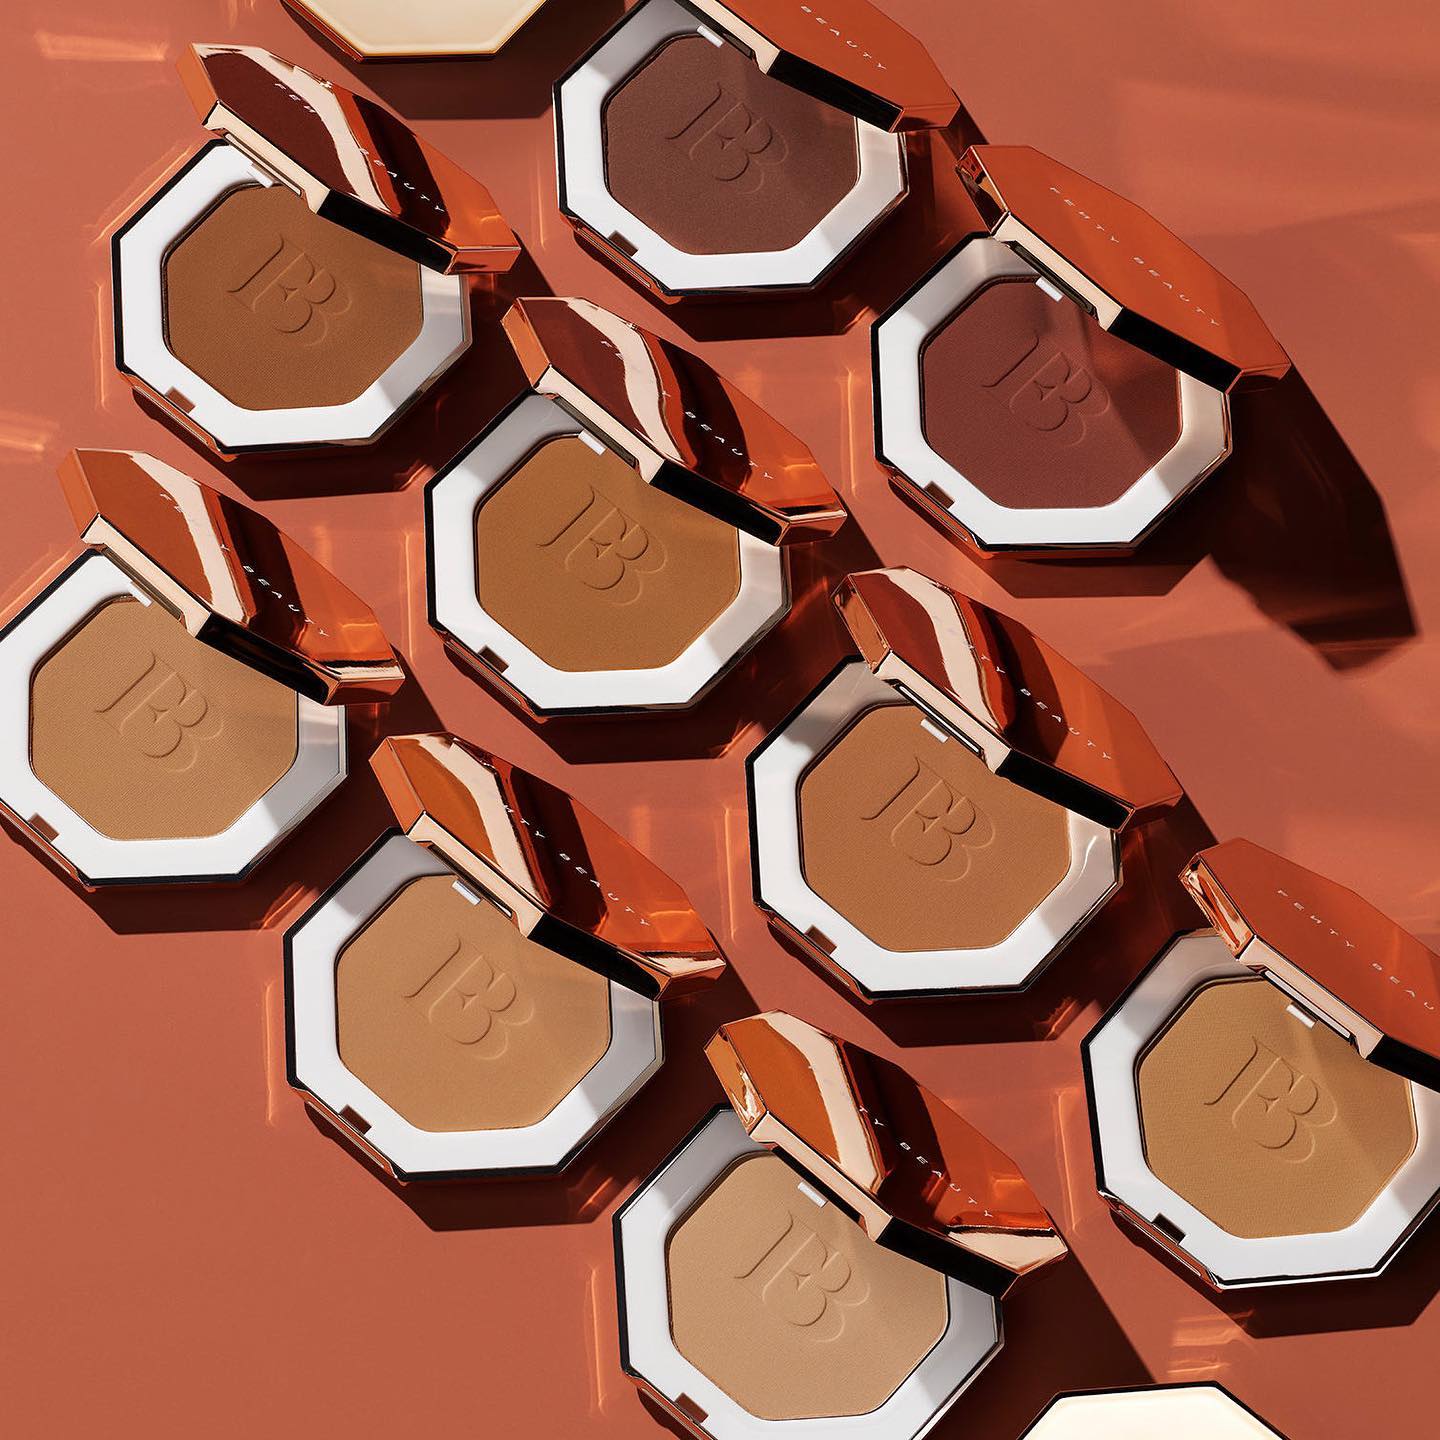 Various skin shades of Fenty Beauty bronzer are displayed on a rust orange background.